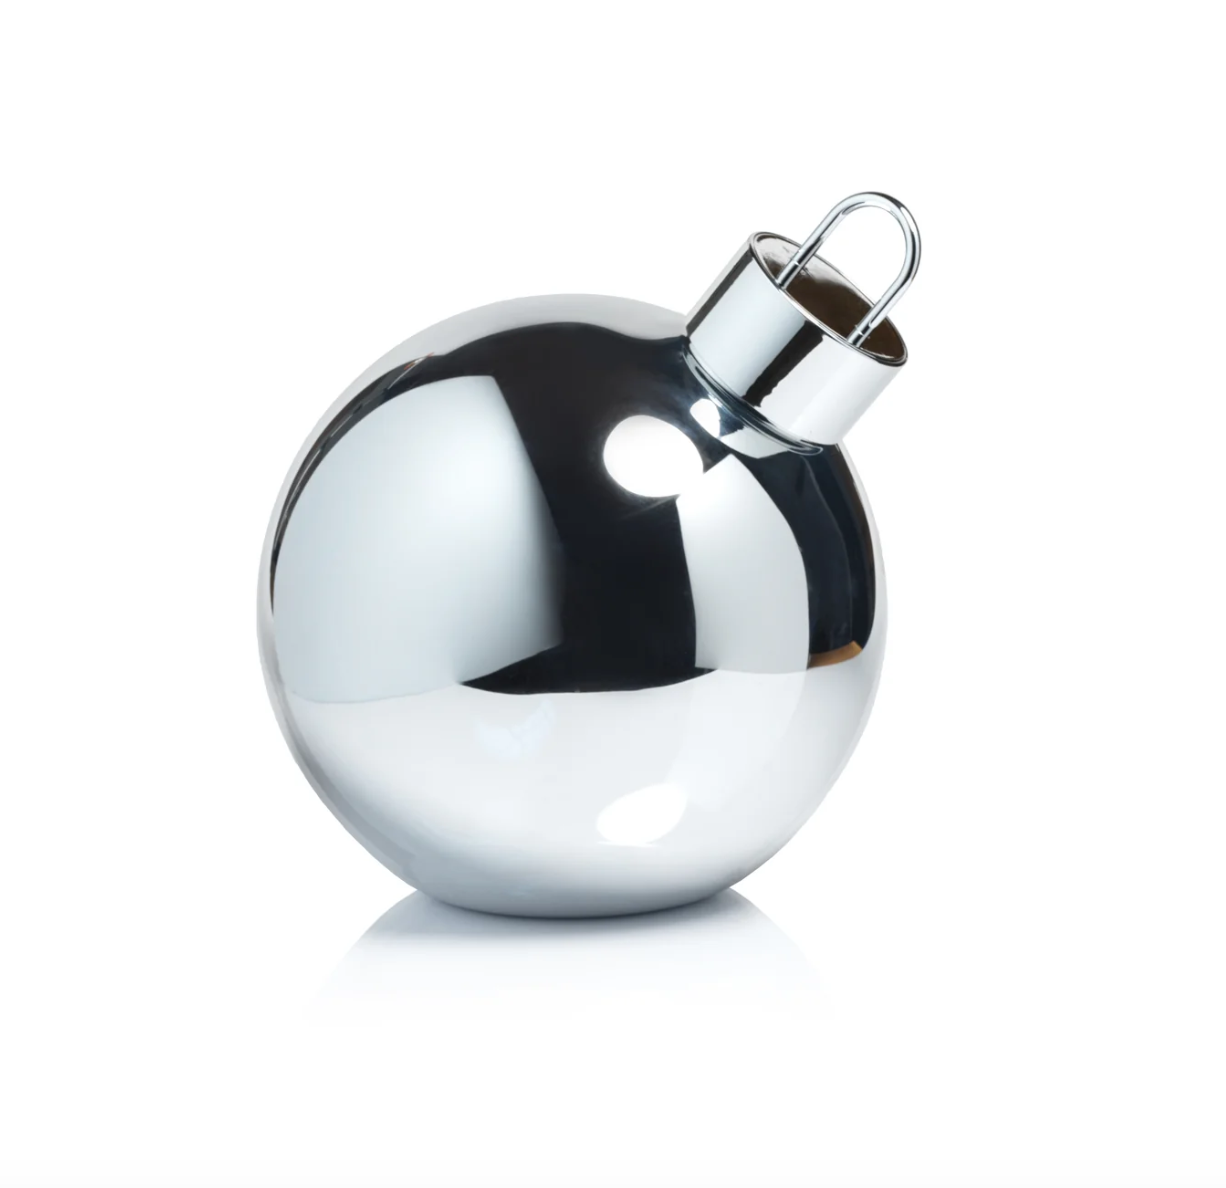 LED Glass Oversized Large Ball Ornament - Gold & Silver